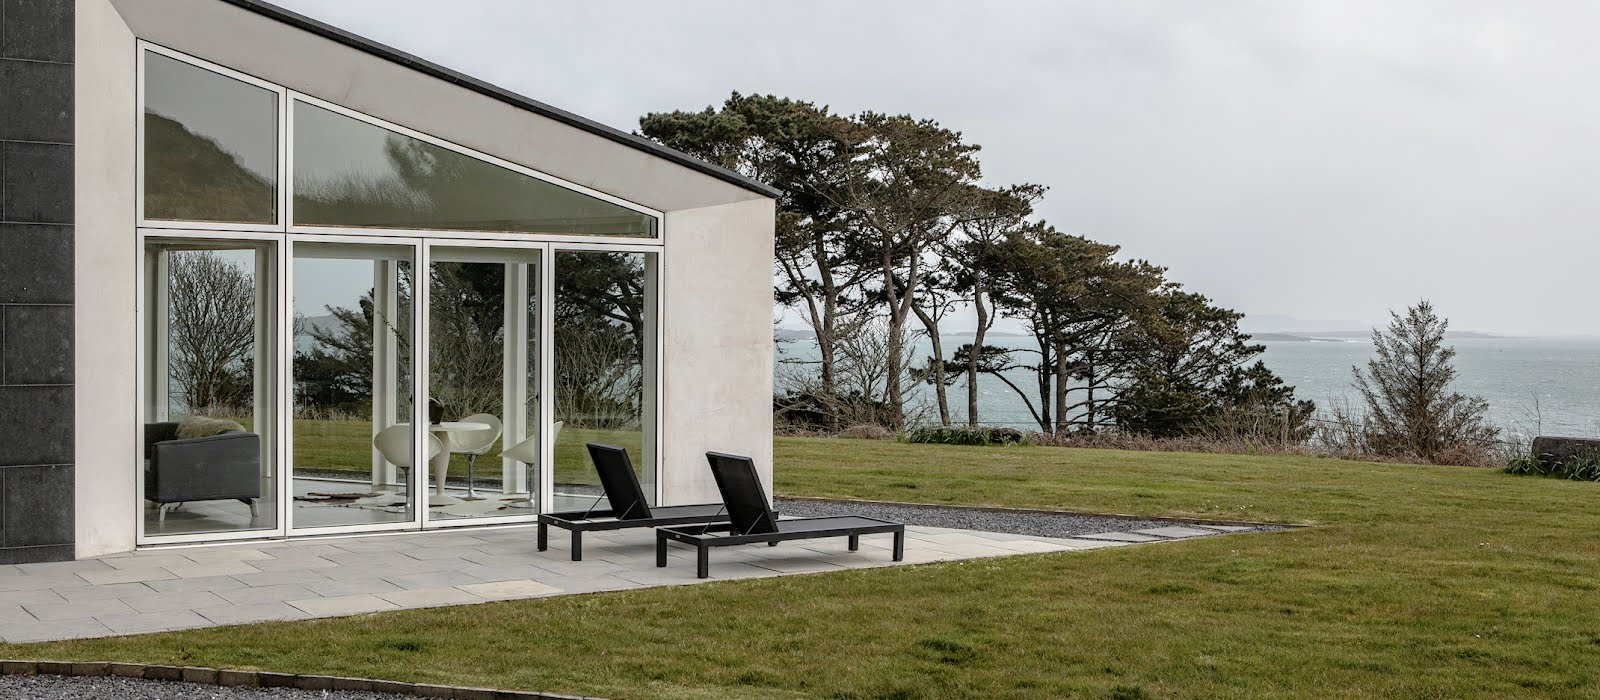 This Schull home was designed to maximise its stunning sea views